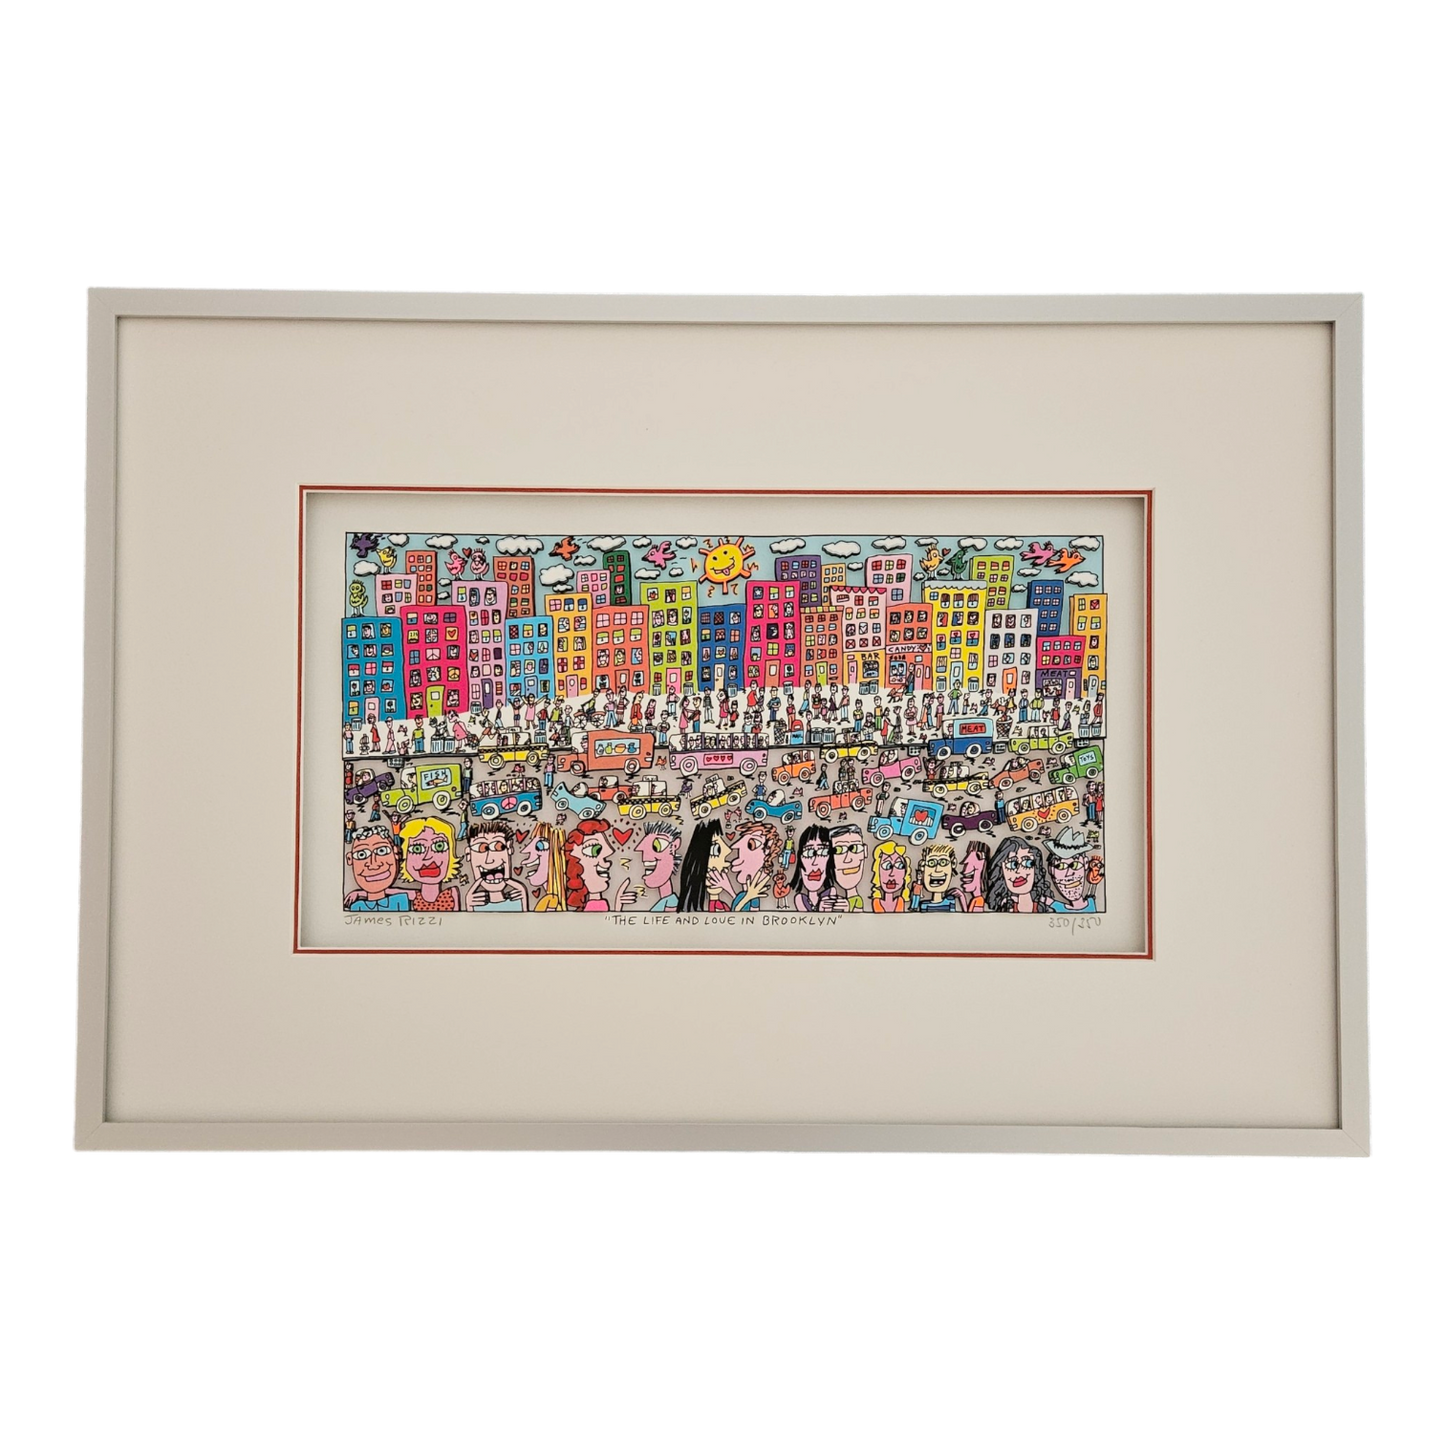 James Rizzi - Life and Love in Brooklyn (2015)